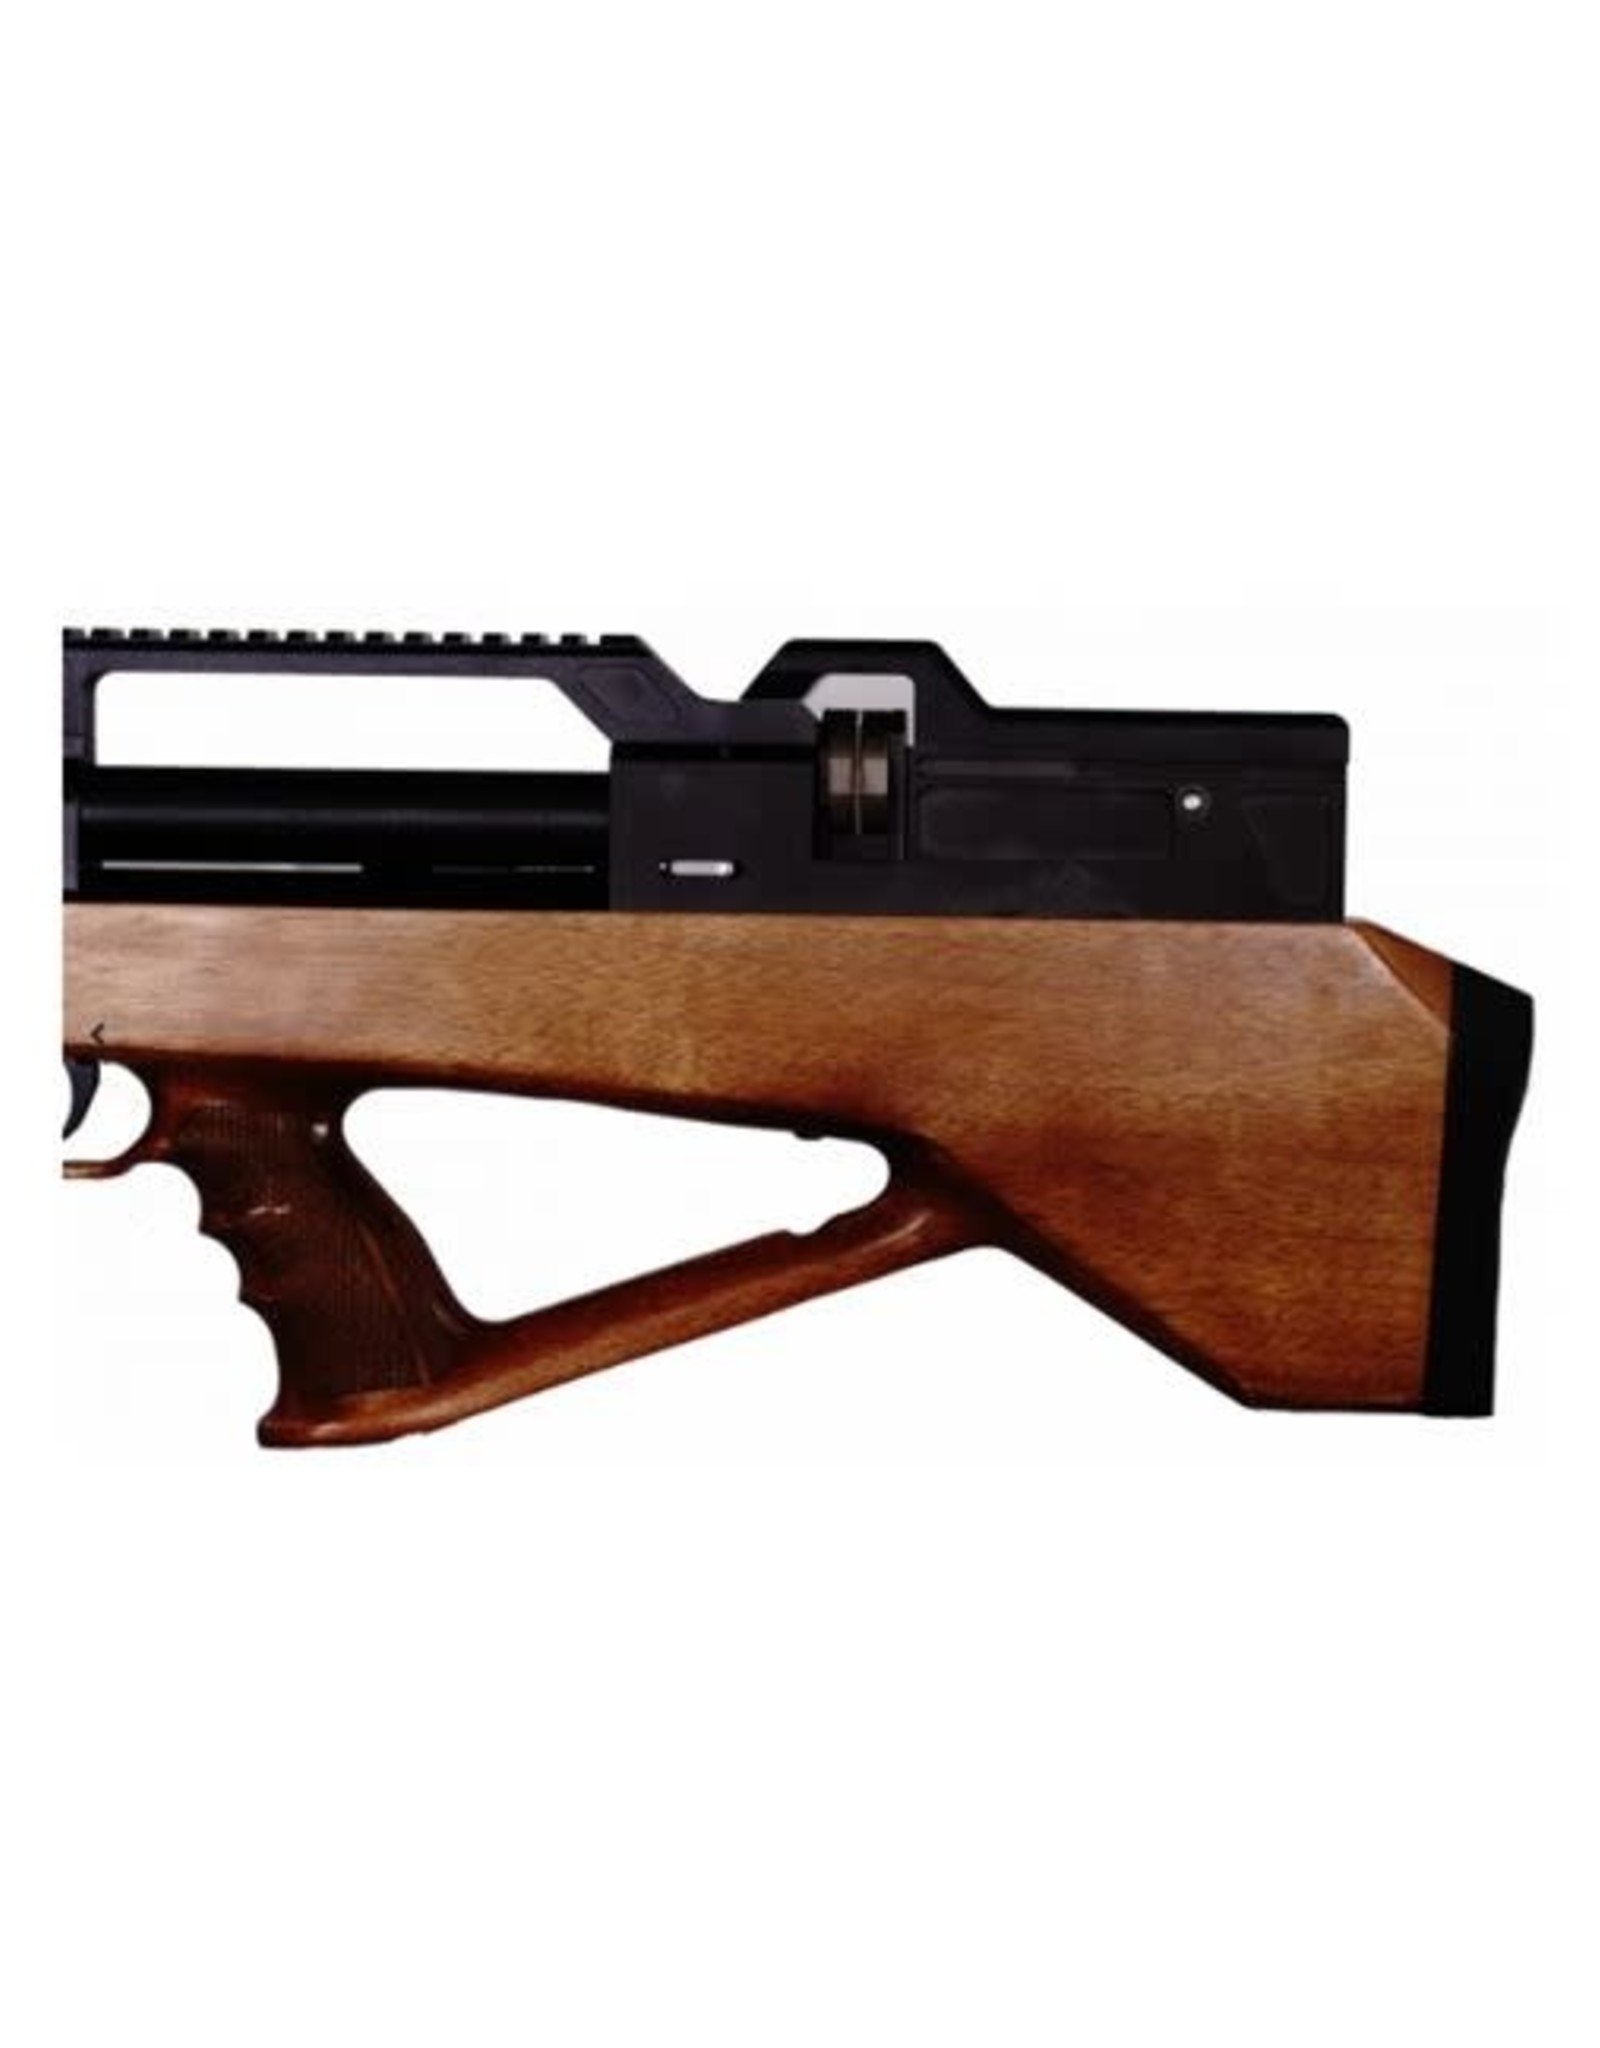 Evanix .457 Cal | 5 Rd | Max-ML Bullpup PCP Rifle with Wood Stock by Evanix